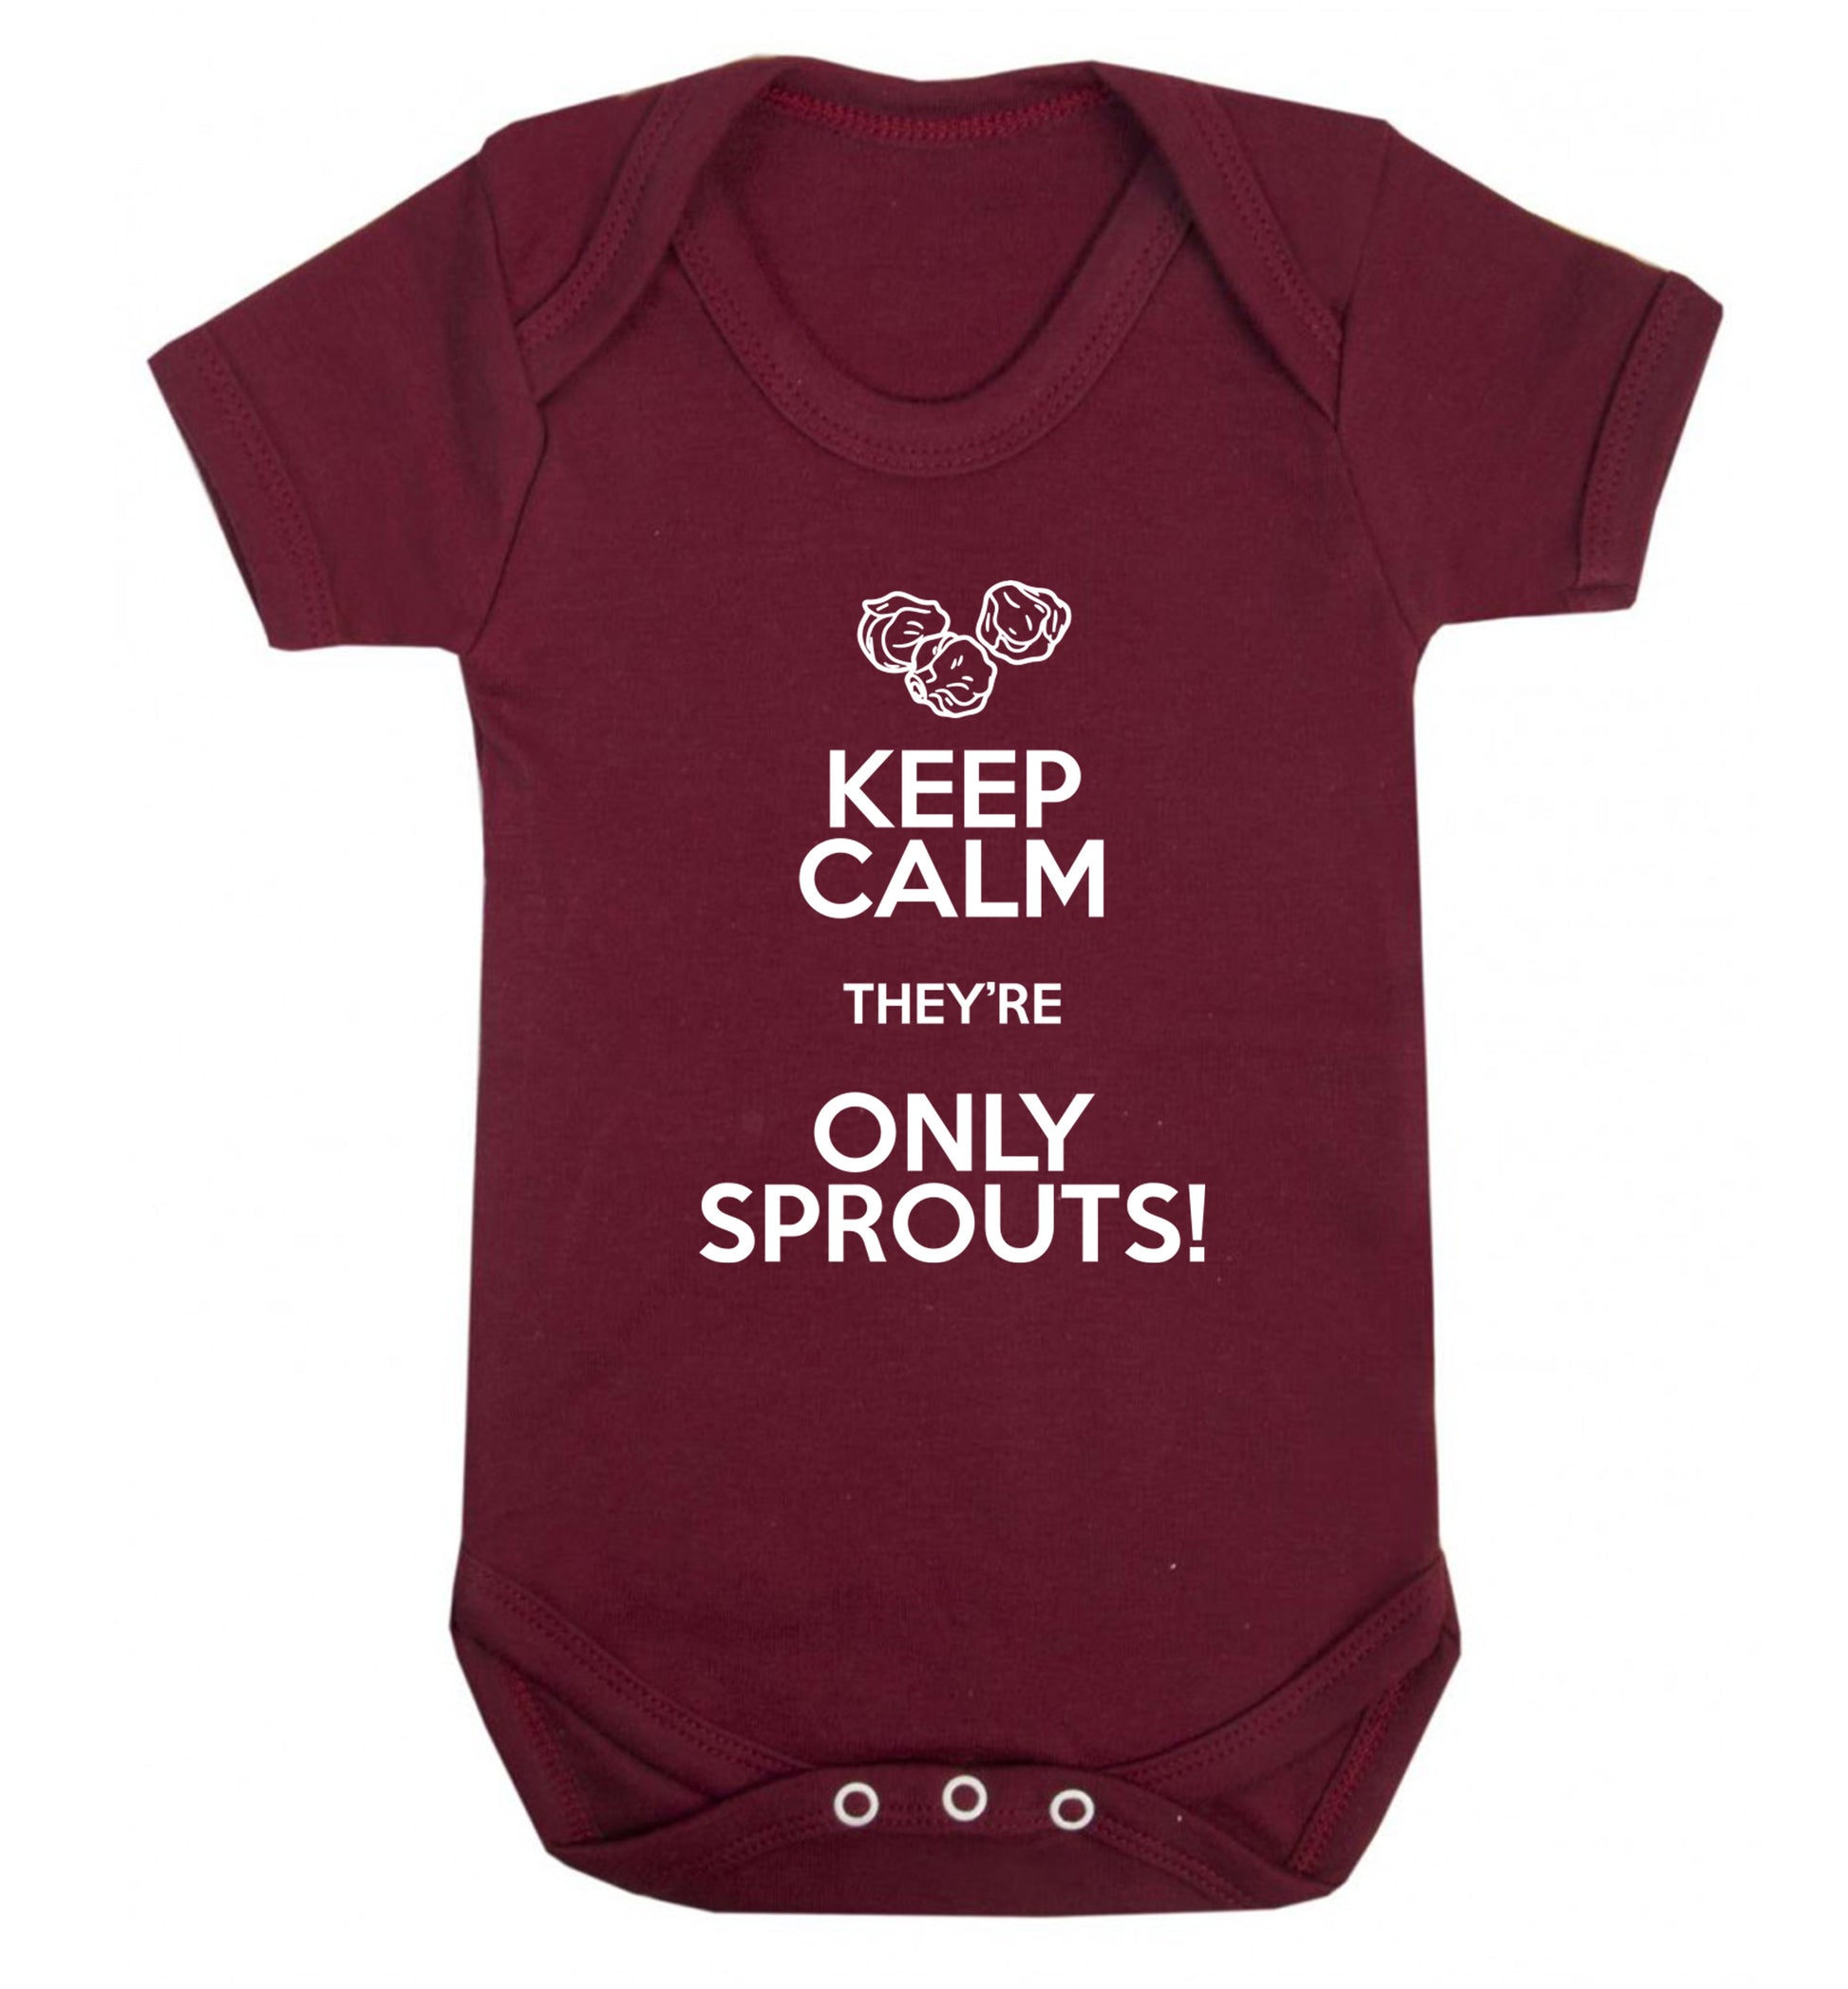 Keep calm they're only sprouts Baby Vest maroon 18-24 months